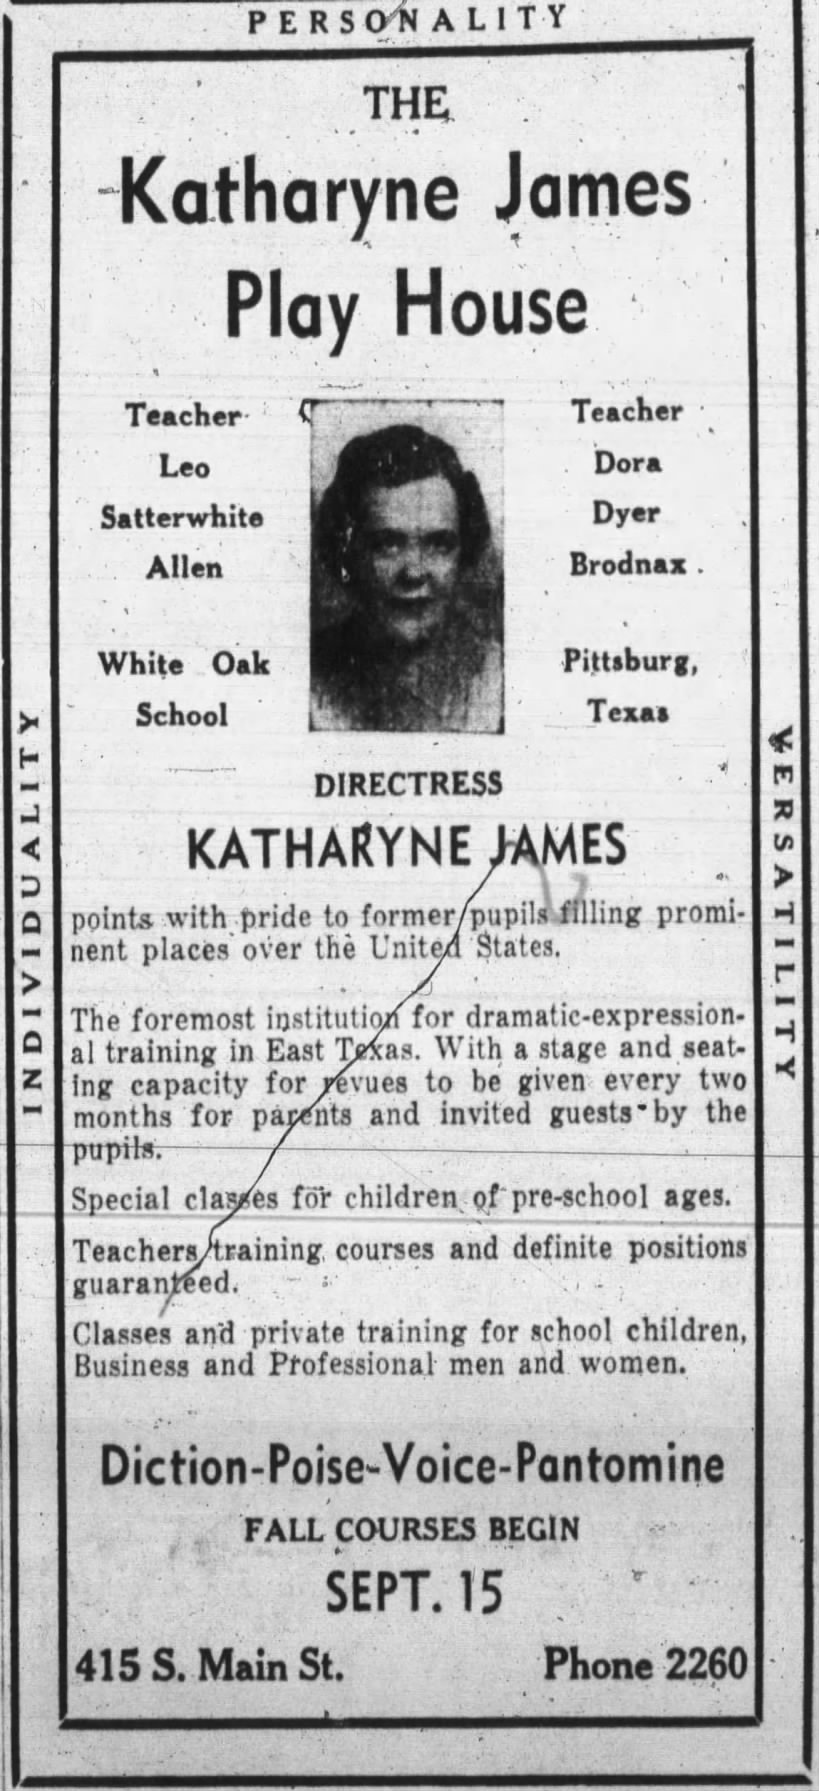 Ad for the Katharyne James Playhouse in Texas. She was the mother of actor John James.